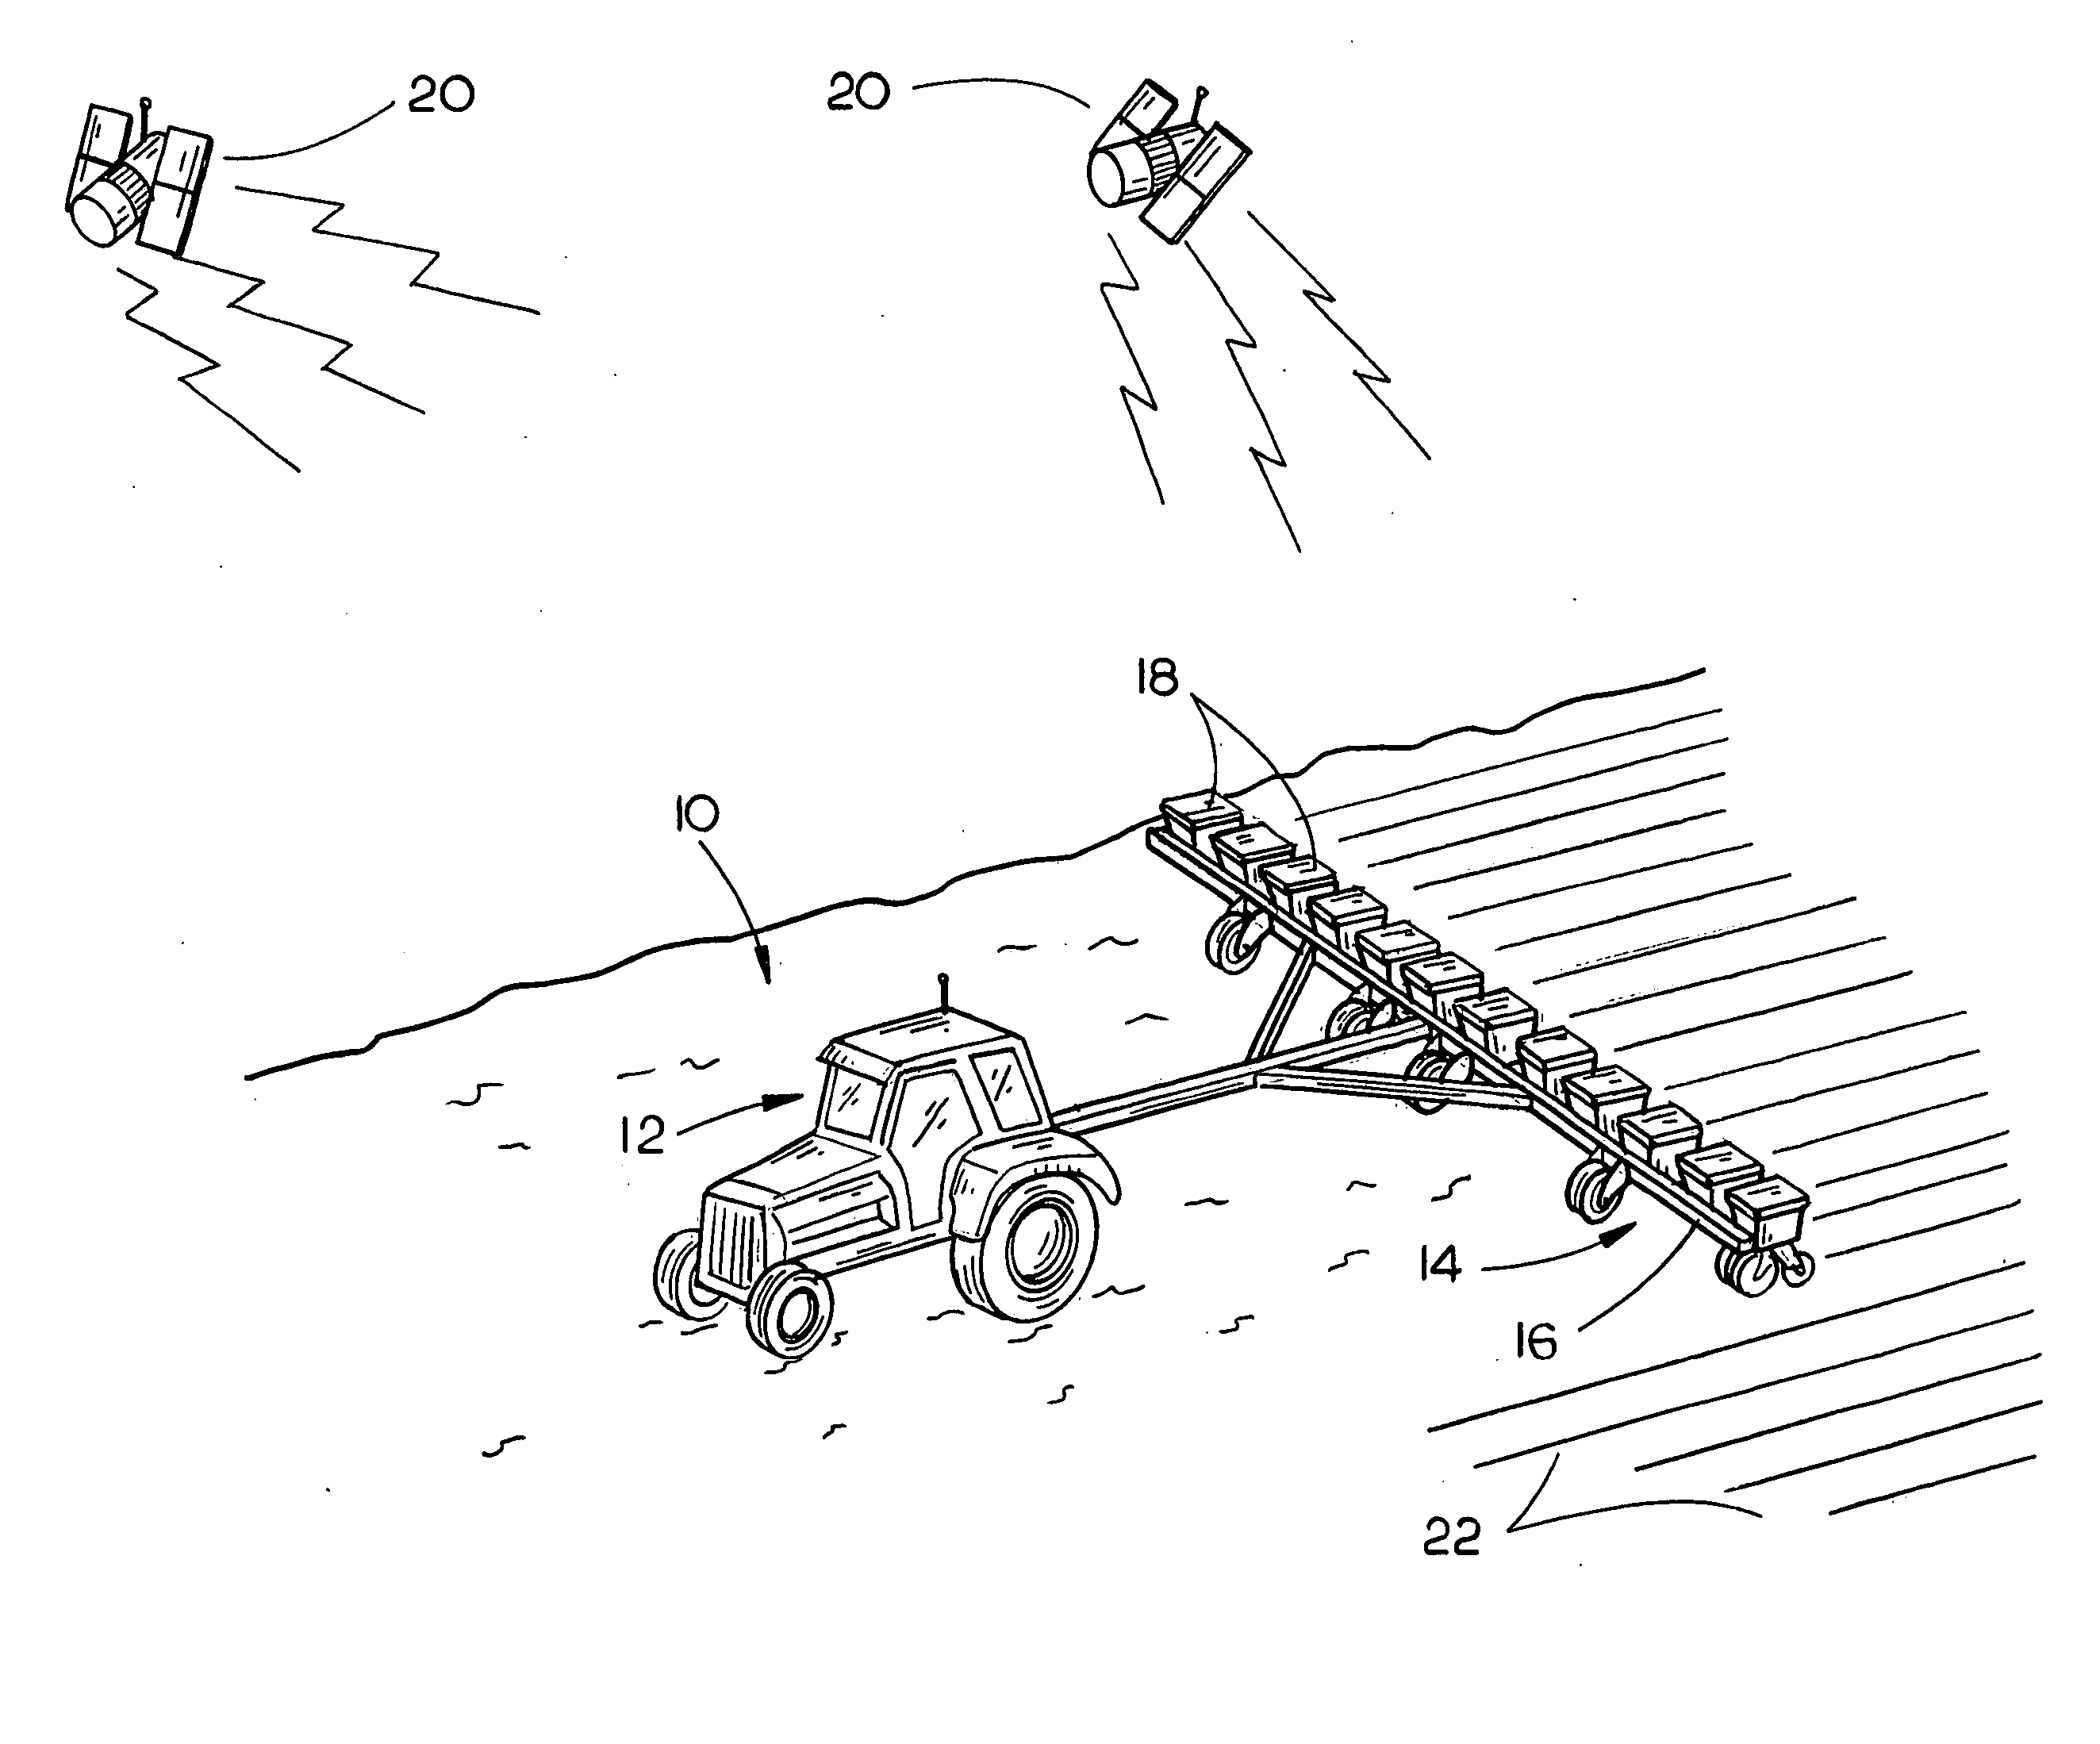 Individual row rate control of farm implements to adjust the volume of crop inputs across wide implements in irregularly shaped or contour areas of chemical application, planting or seeding